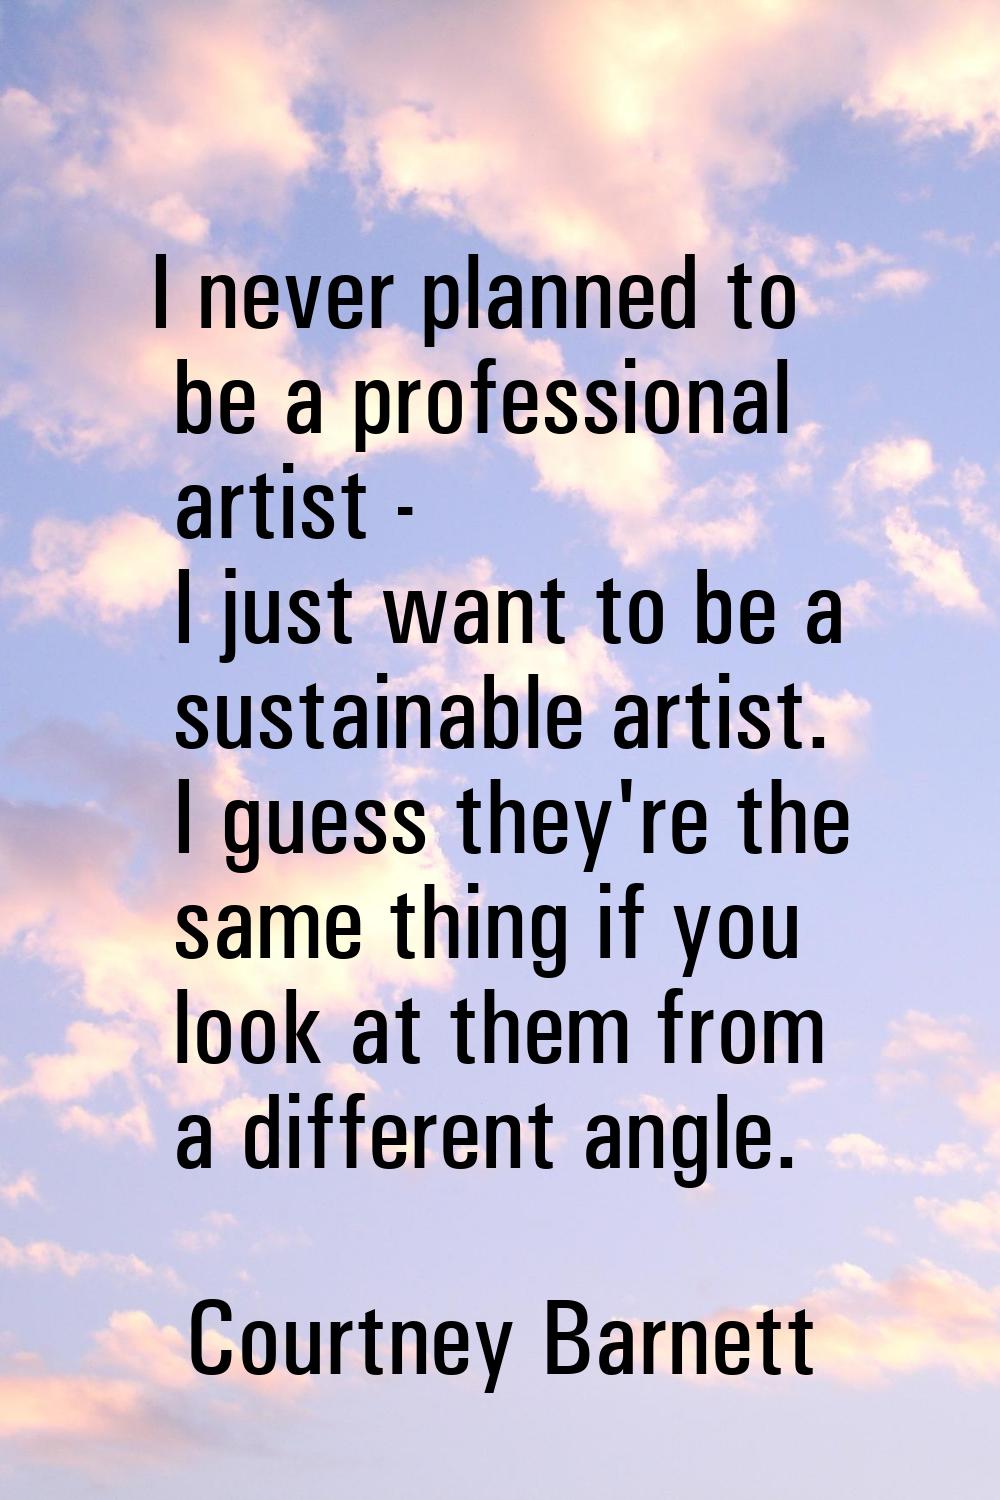 I never planned to be a professional artist - I just want to be a sustainable artist. I guess they'